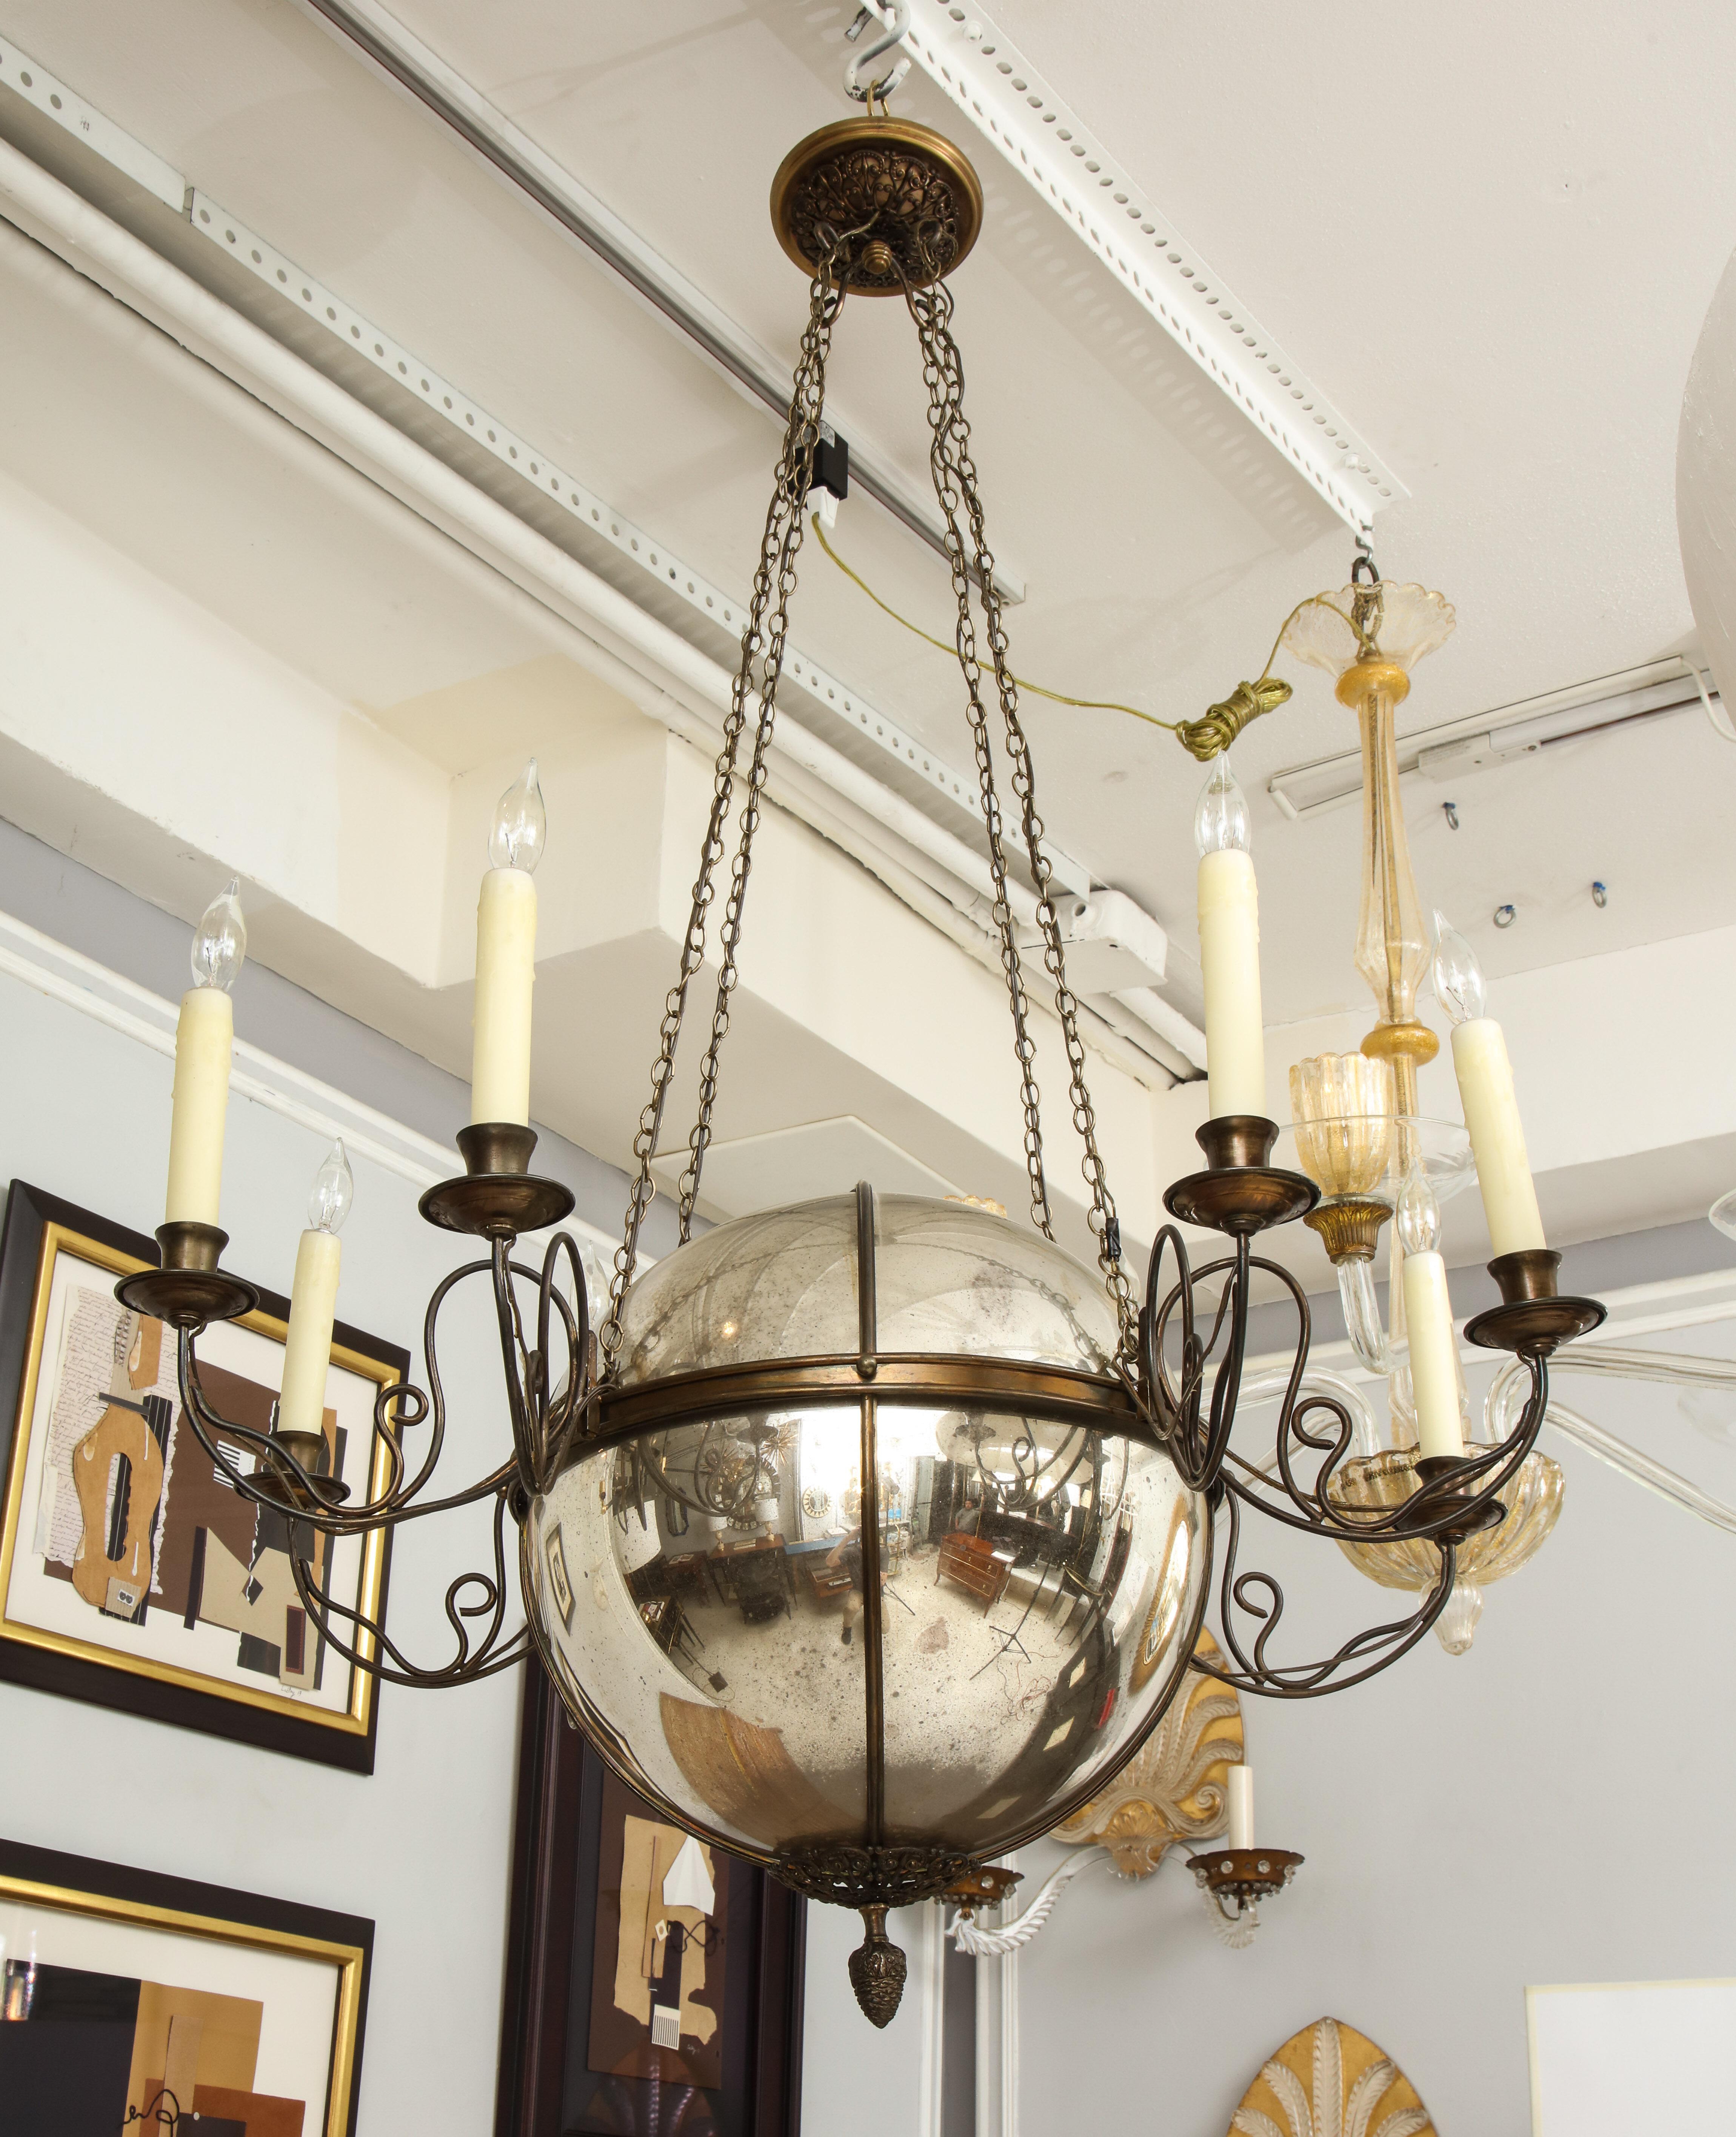 Unusual antique eight-light brass chandelier with a central mercury glass orb.